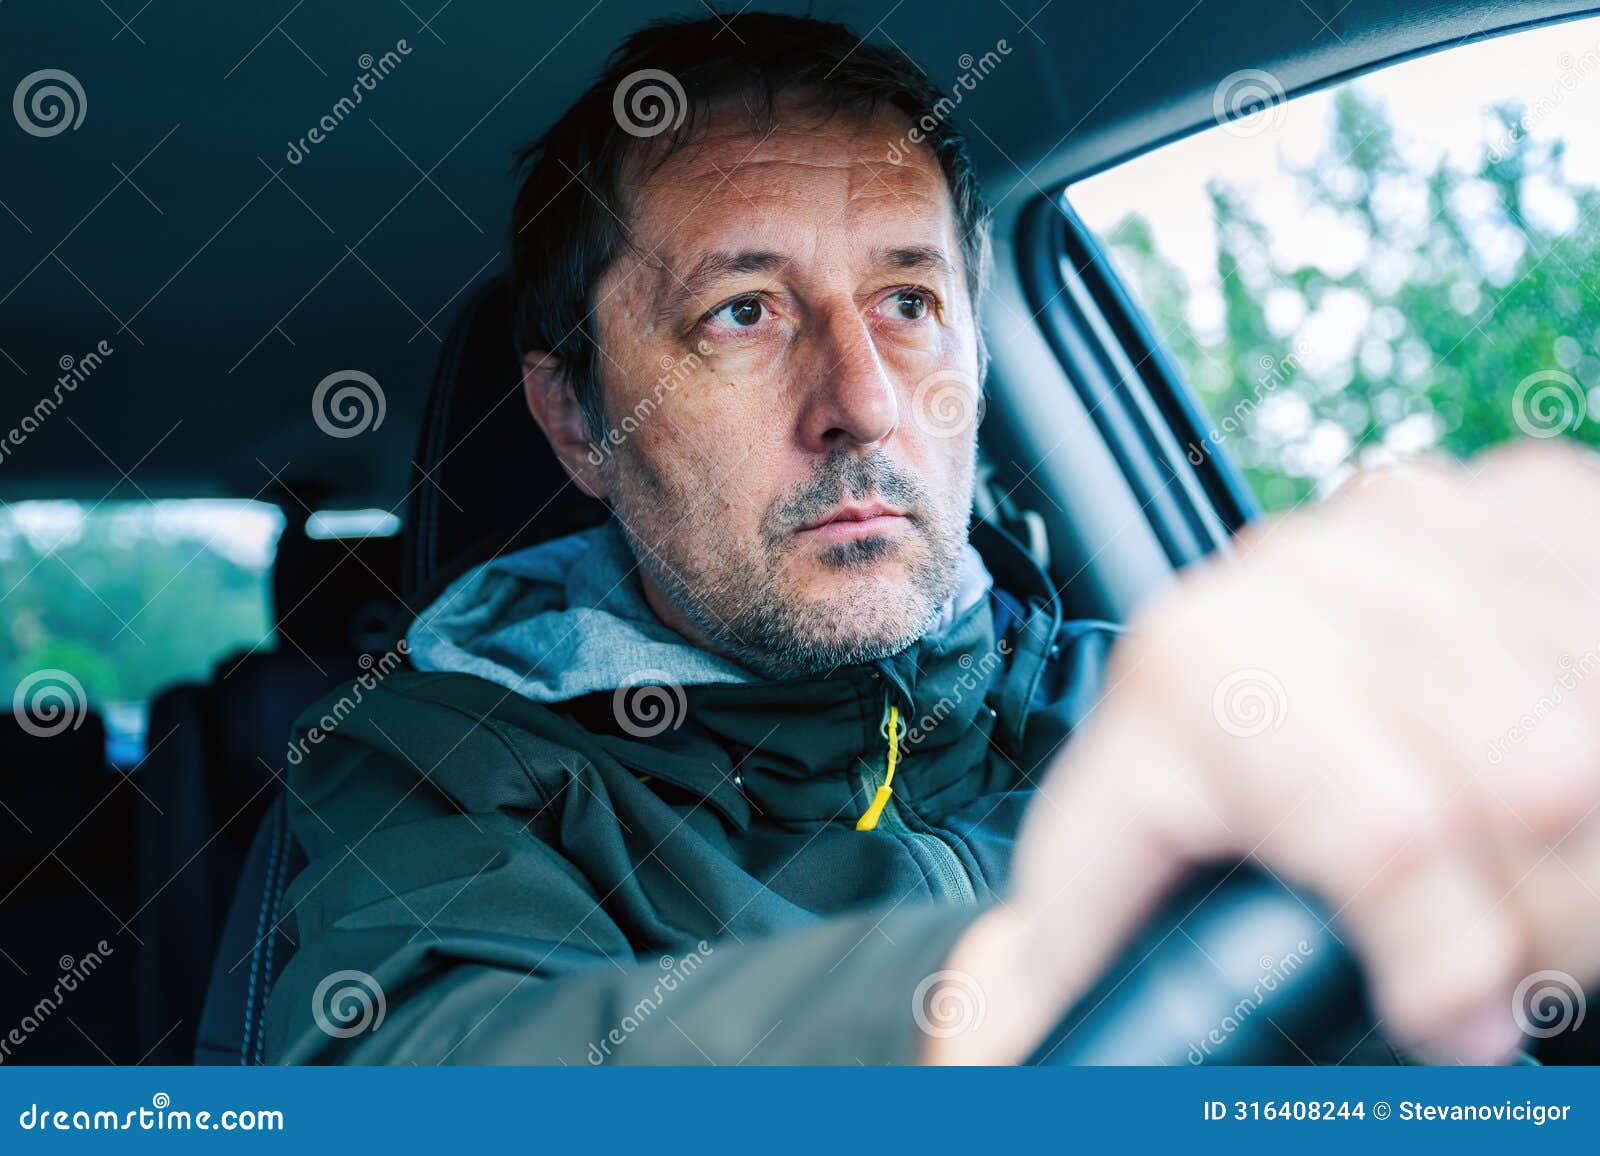 closeup portrait of cautious male driver gripping the steering wheel and driving a car on a road trip